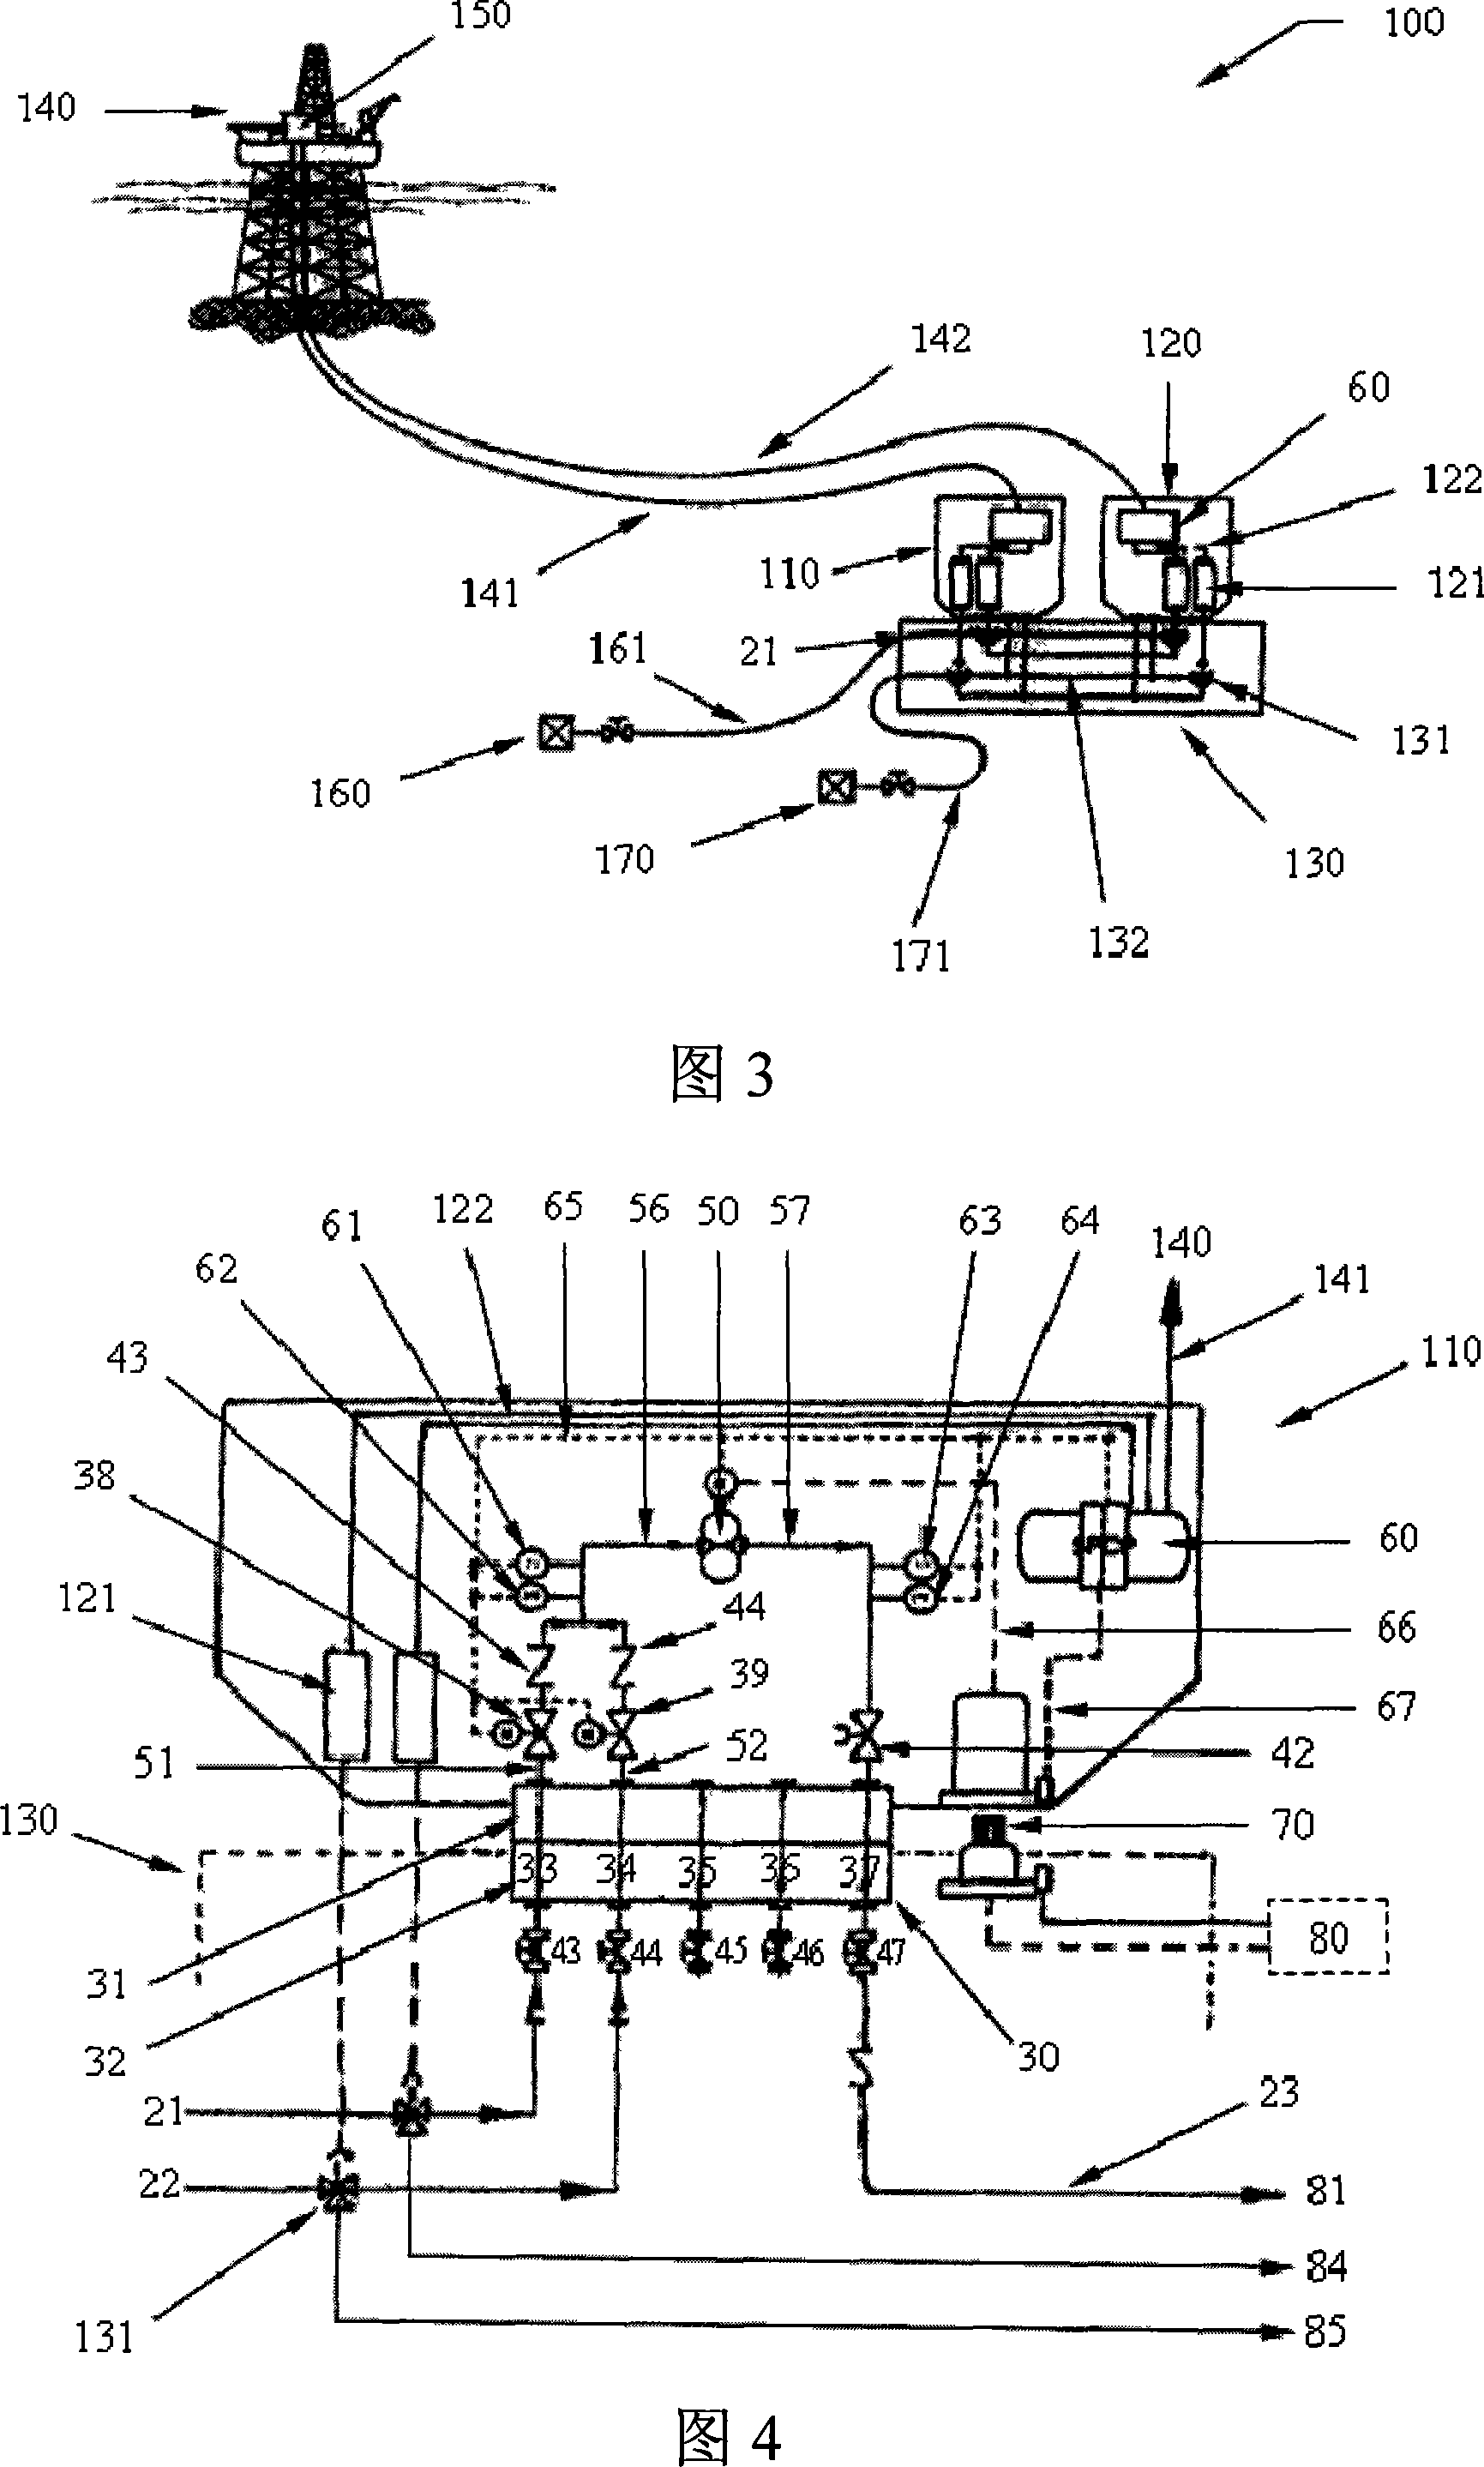 Control system for seabed processing system